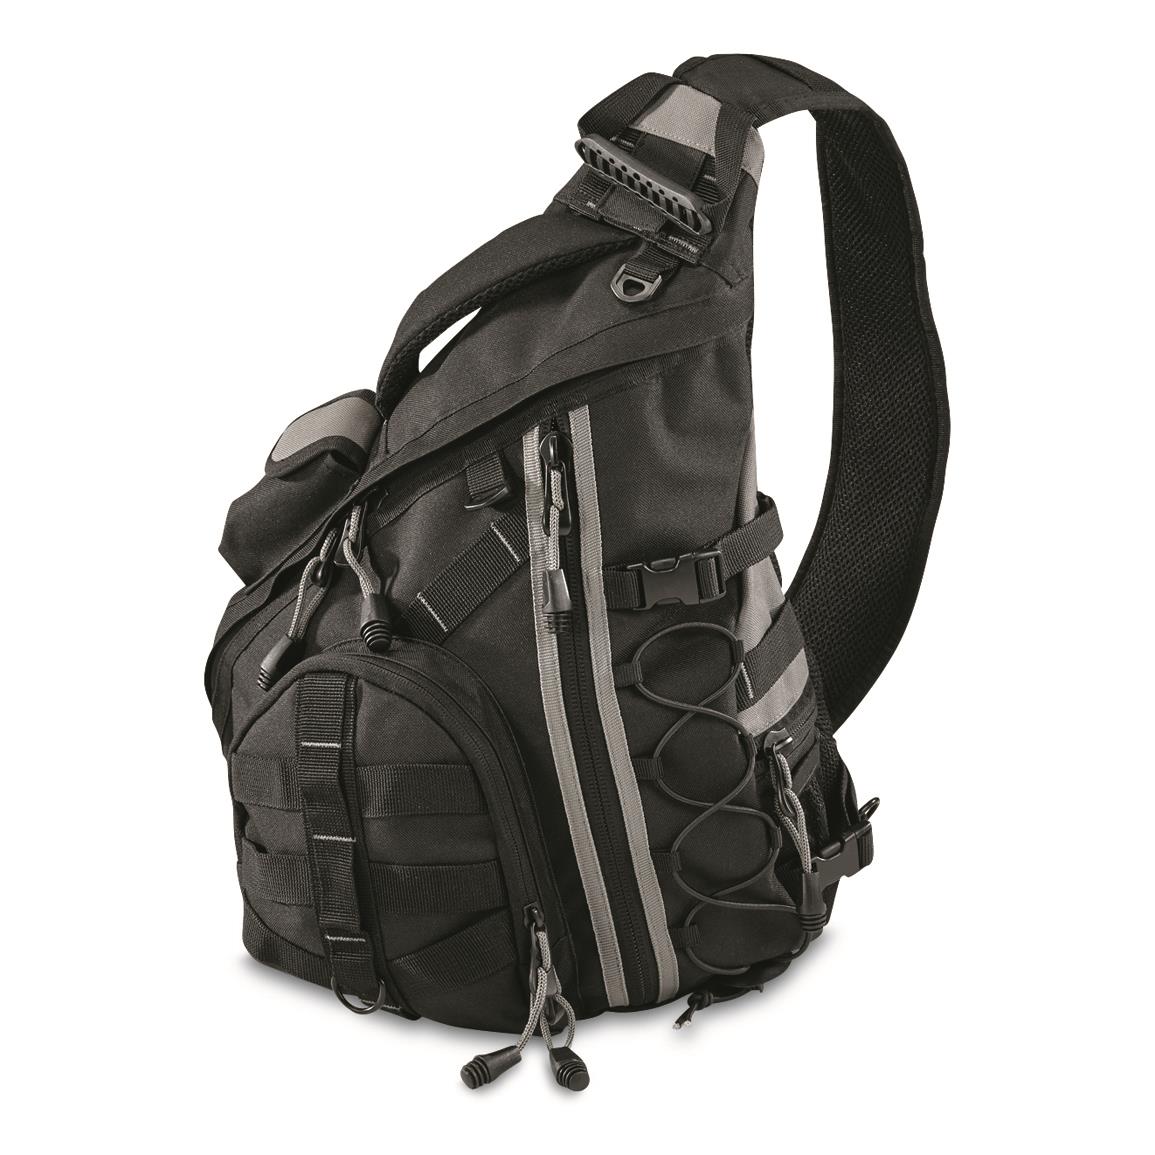 Undercover Tactical Sling Pack - 690244, Military Style Backpacks & Bags at Sportsman&#39;s Guide